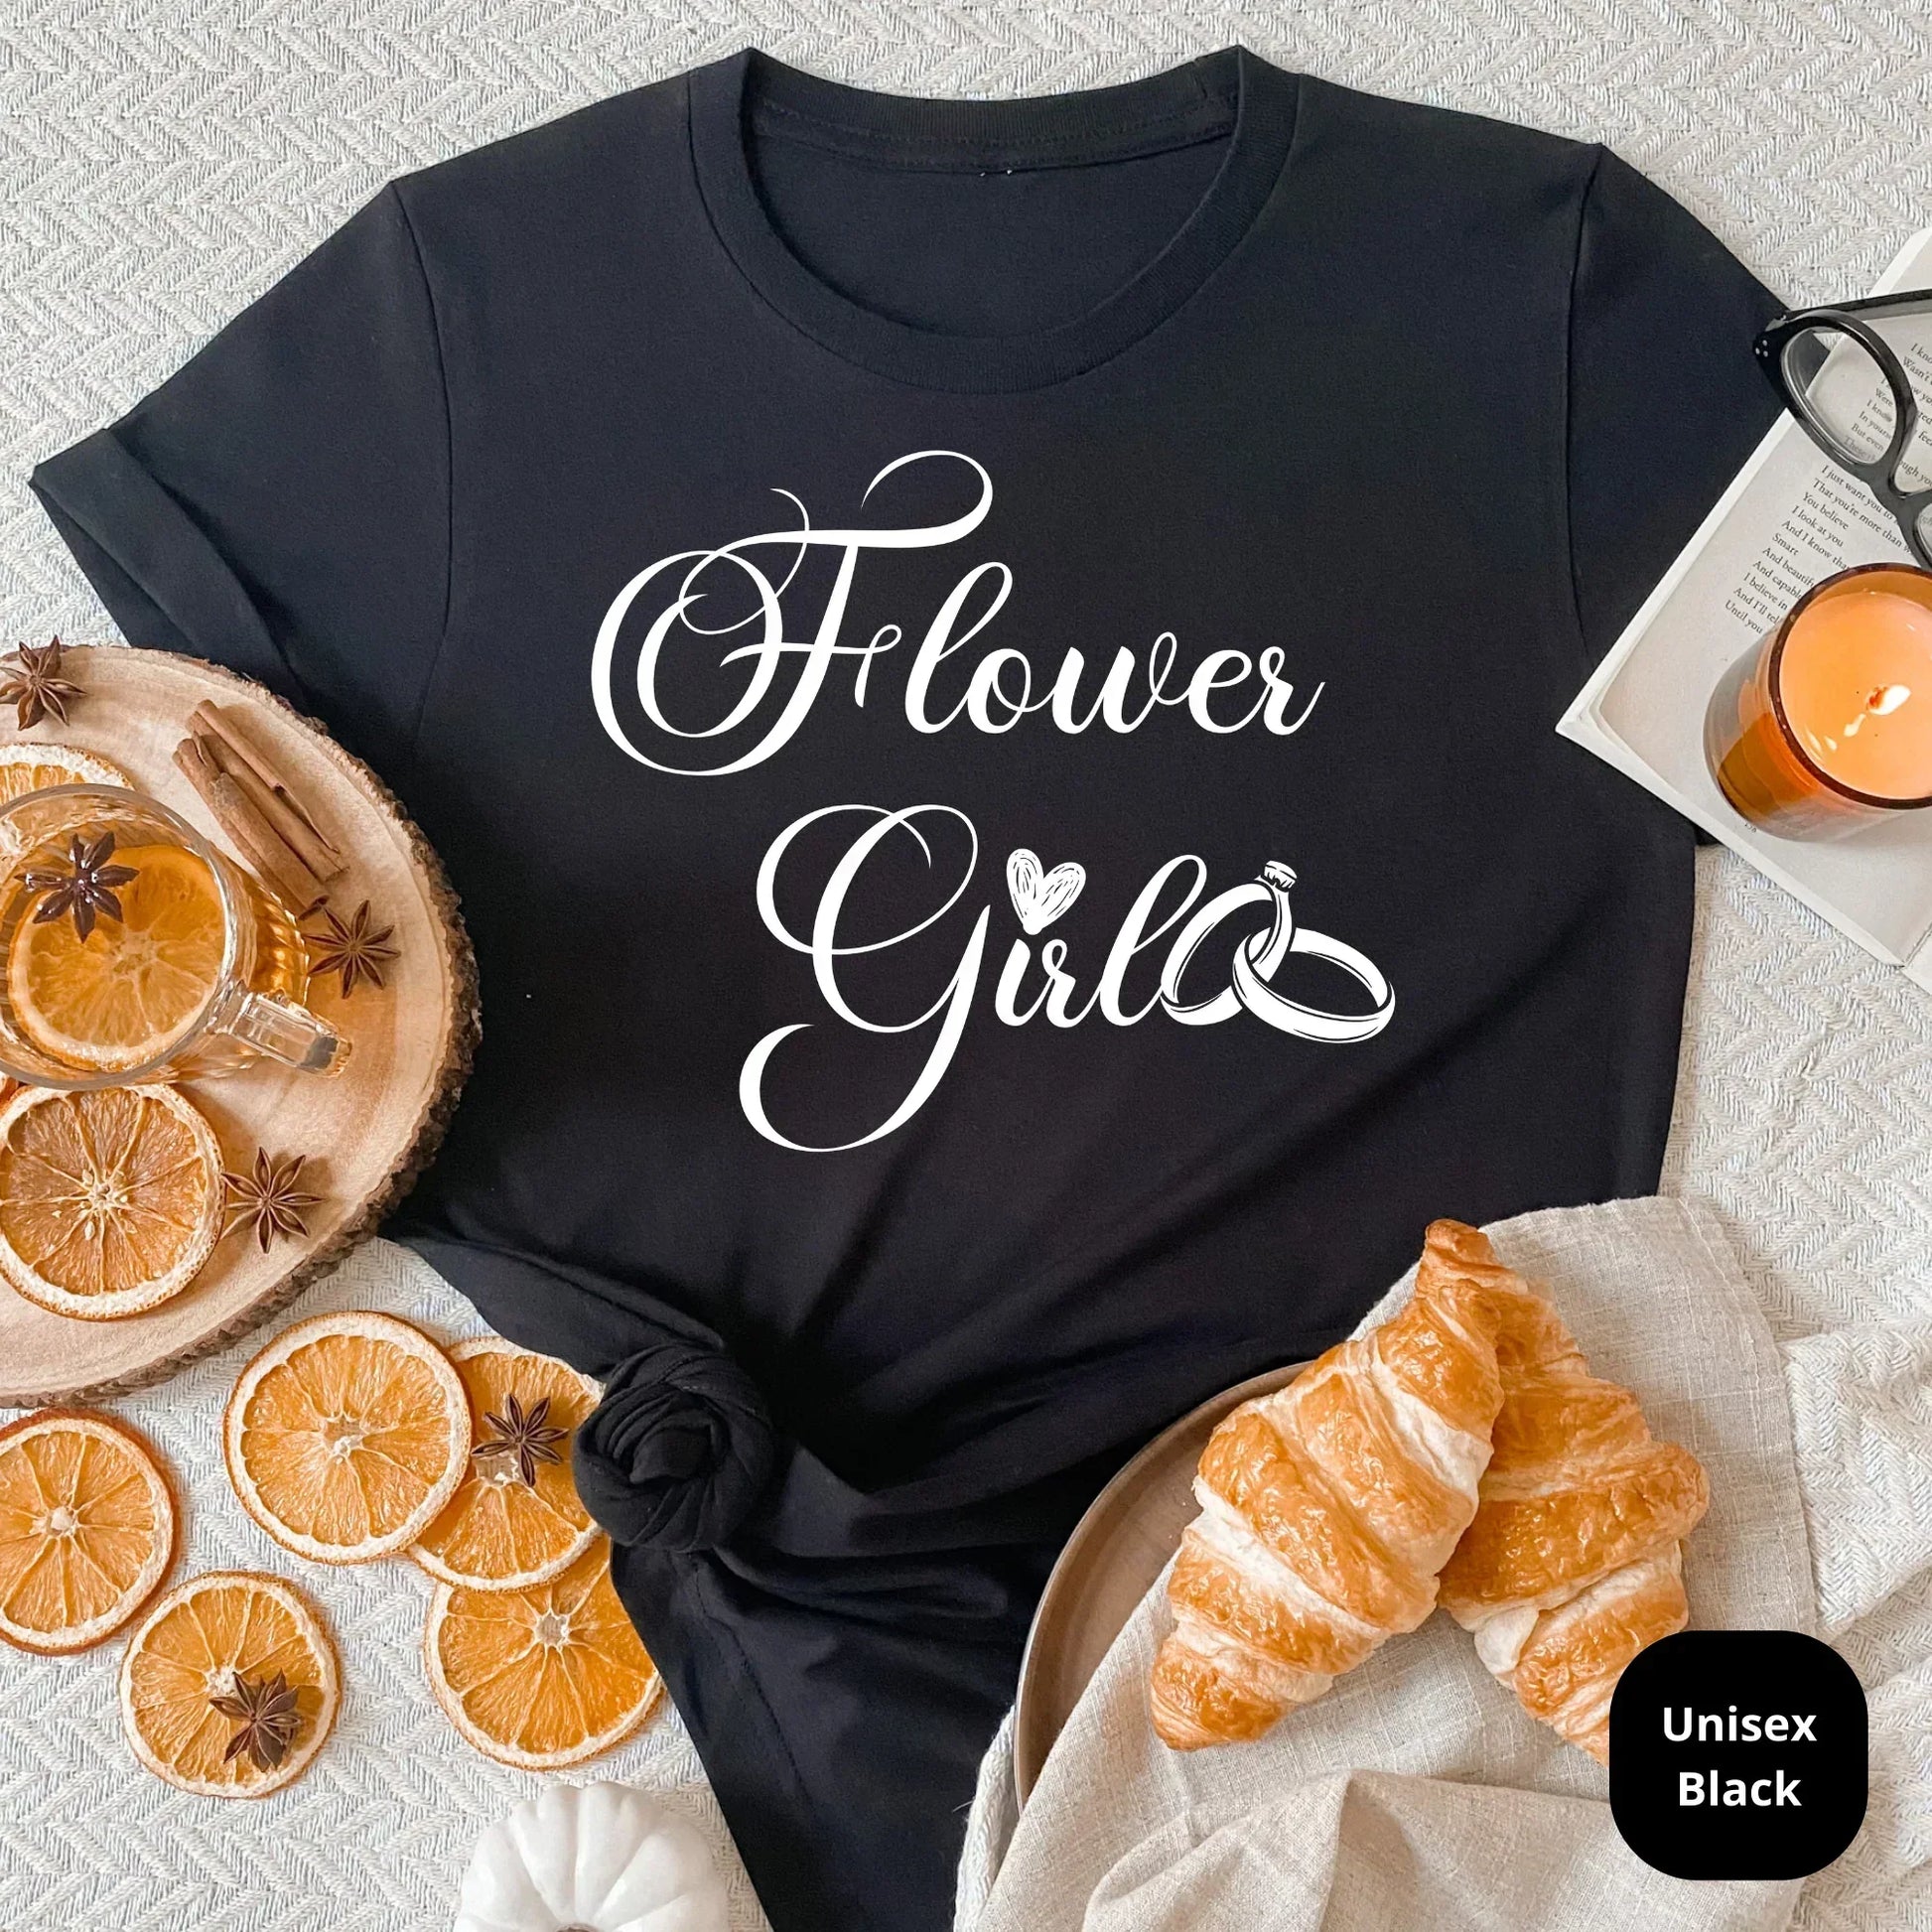 Bridal Party Shirts for Wedding Party